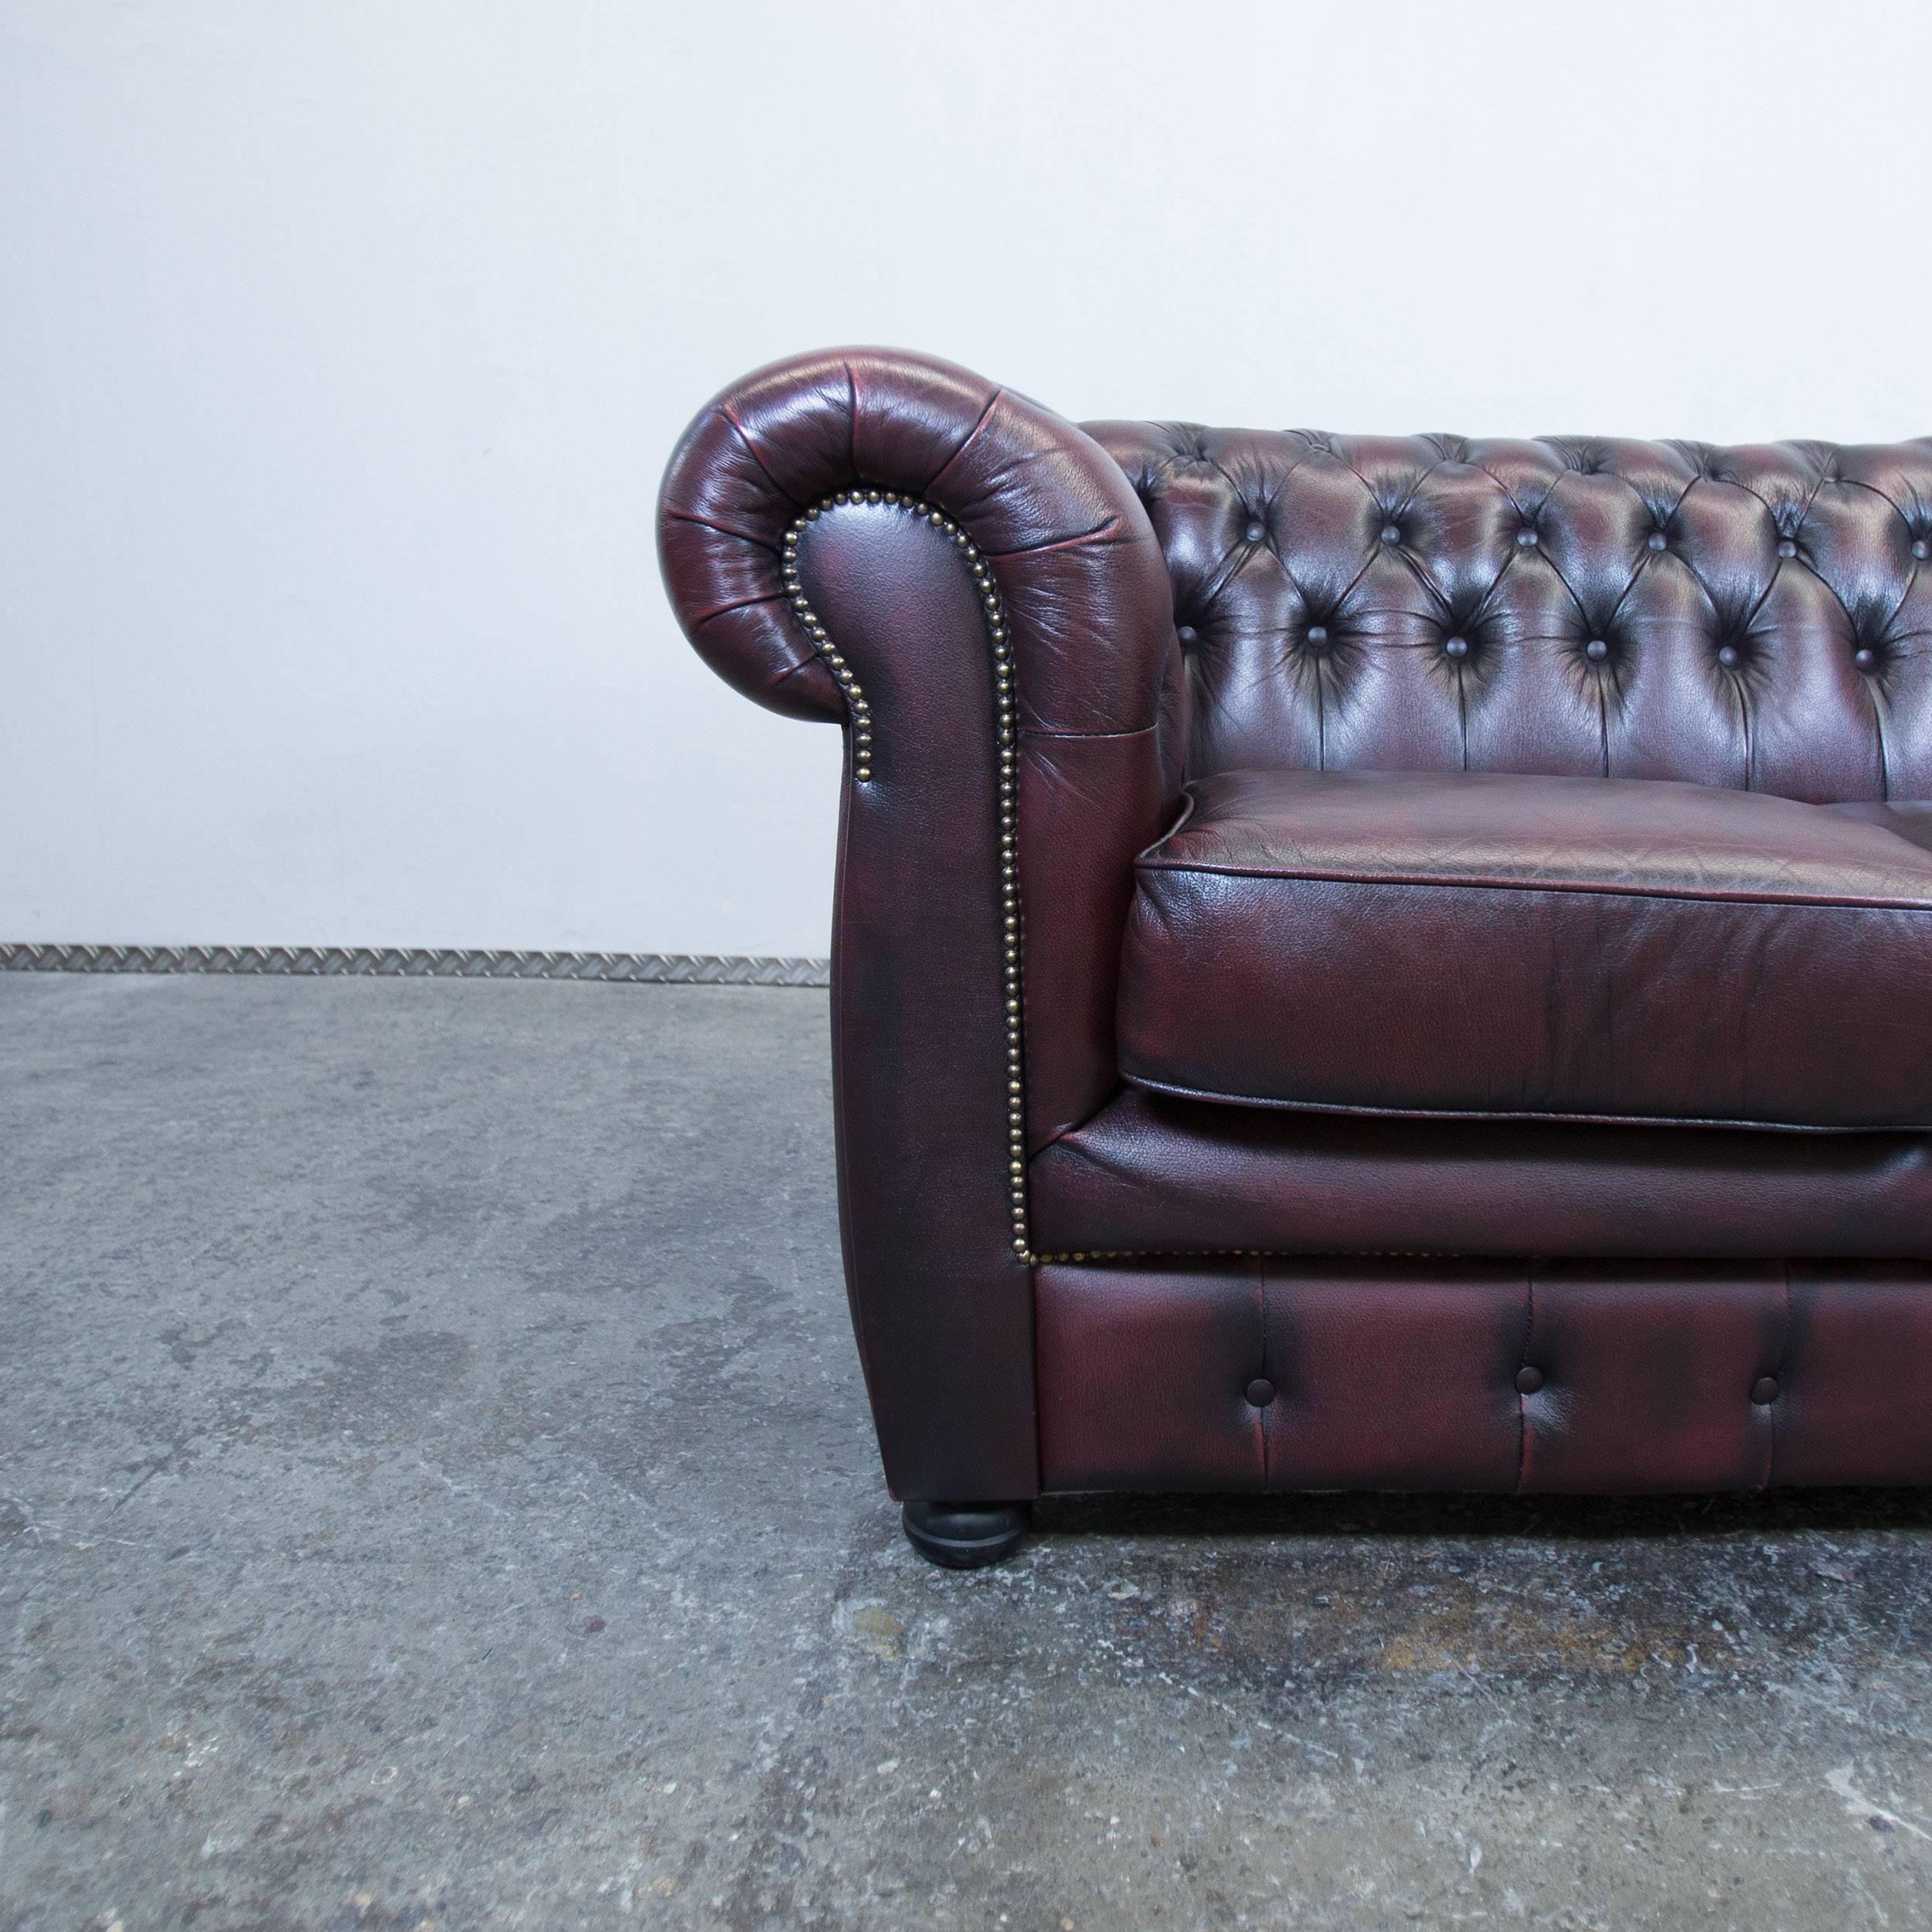 Red leather Chesterfield three-seat sofa by Möbel Art.